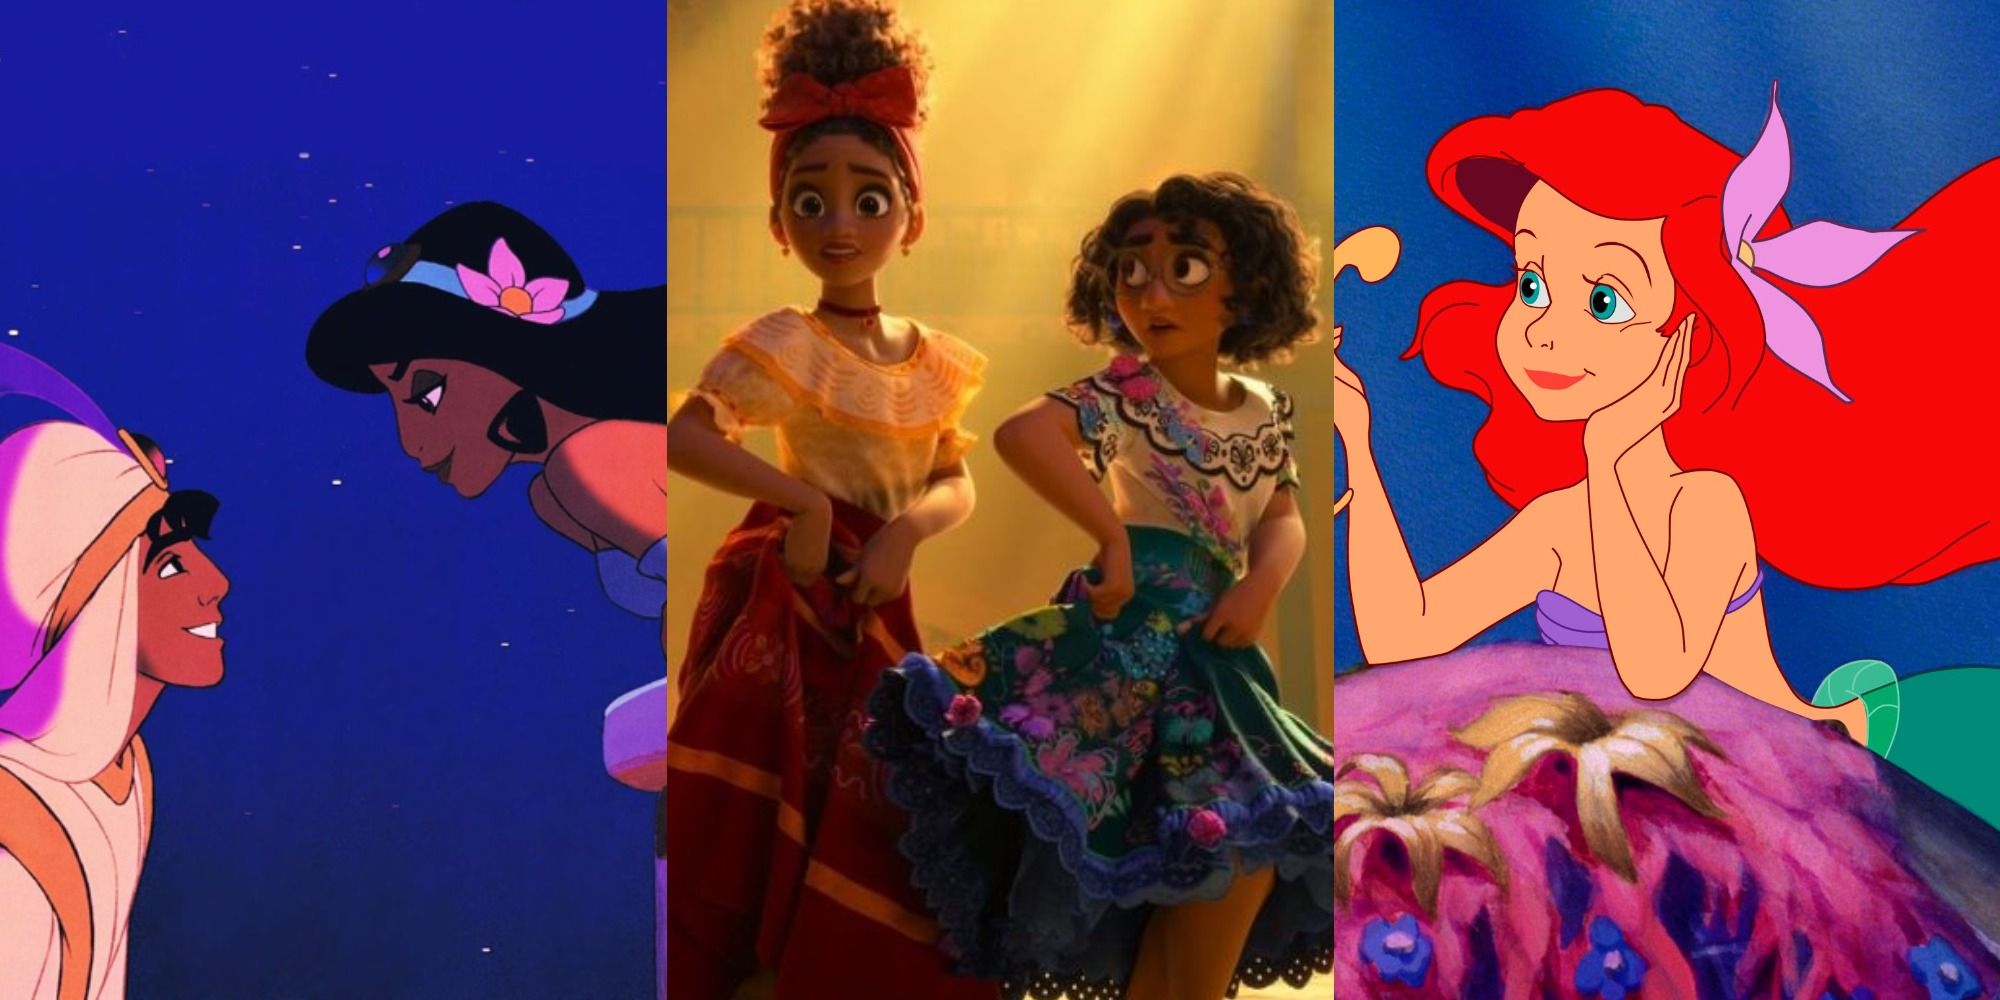 Split image of Jasmine about to kiss Aladdin, Dolores and Mirabel dancing, and Ariel holding a flower